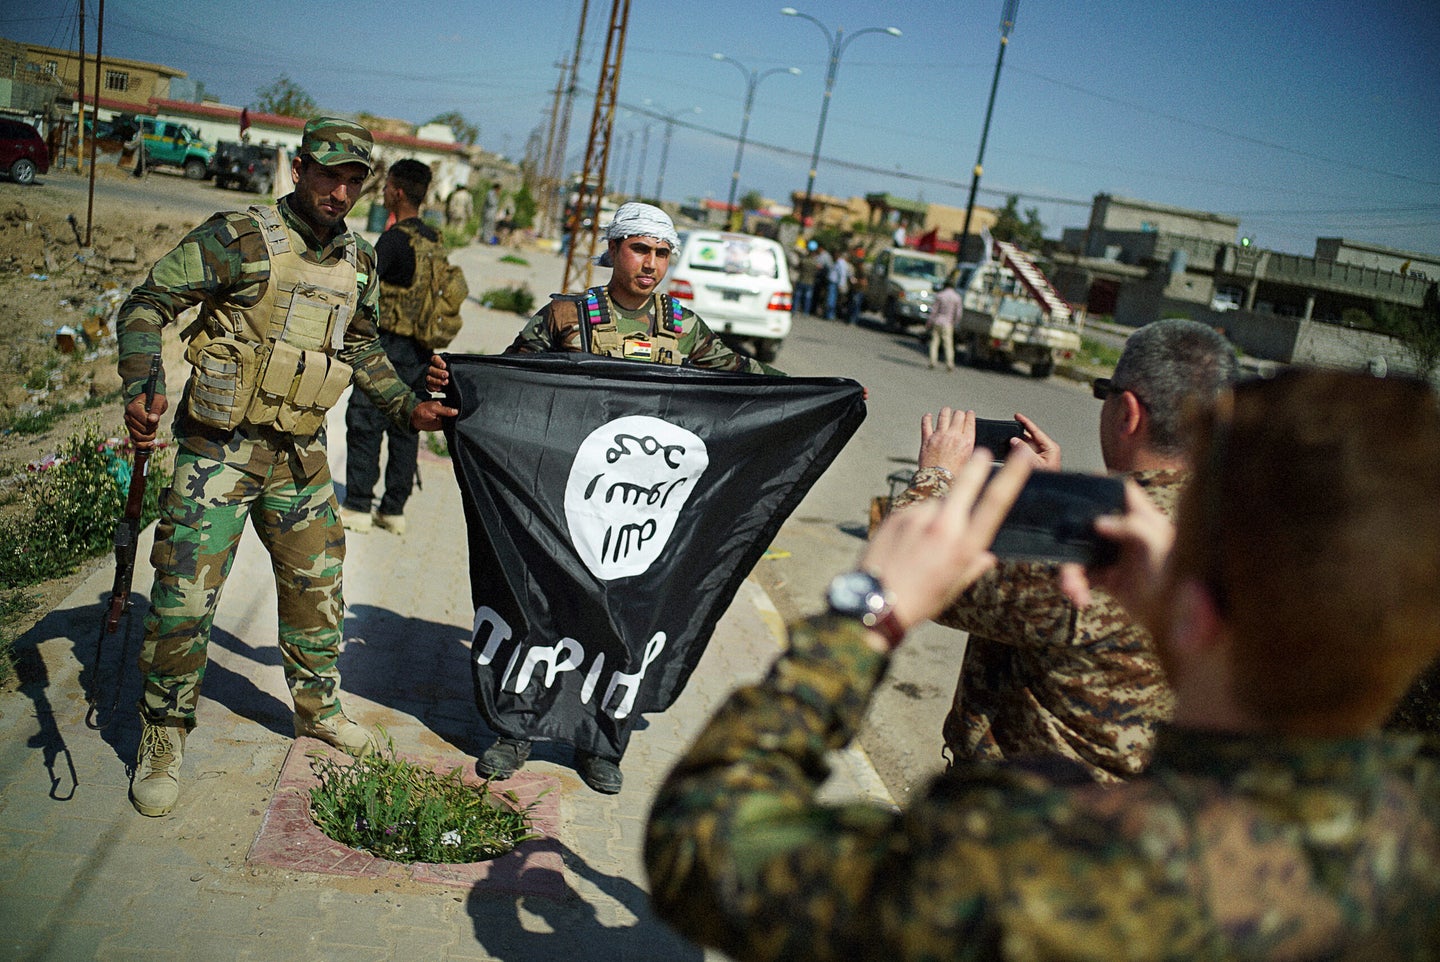 ISIS’s claim to be behind a terrorist attack in Moscow proves the group is still a global threat with branches in areas like Central Asia and Africa, a Pentagon official said Monday. Photo shows Shia militiamen posing for pictures with a captured Islamic State flag on the outskirts of the Iraqi city of Tikrit on March 17, 2015, in Tikrit, Iraq.  (Photo by Ayman Oghanna/Getty Images)